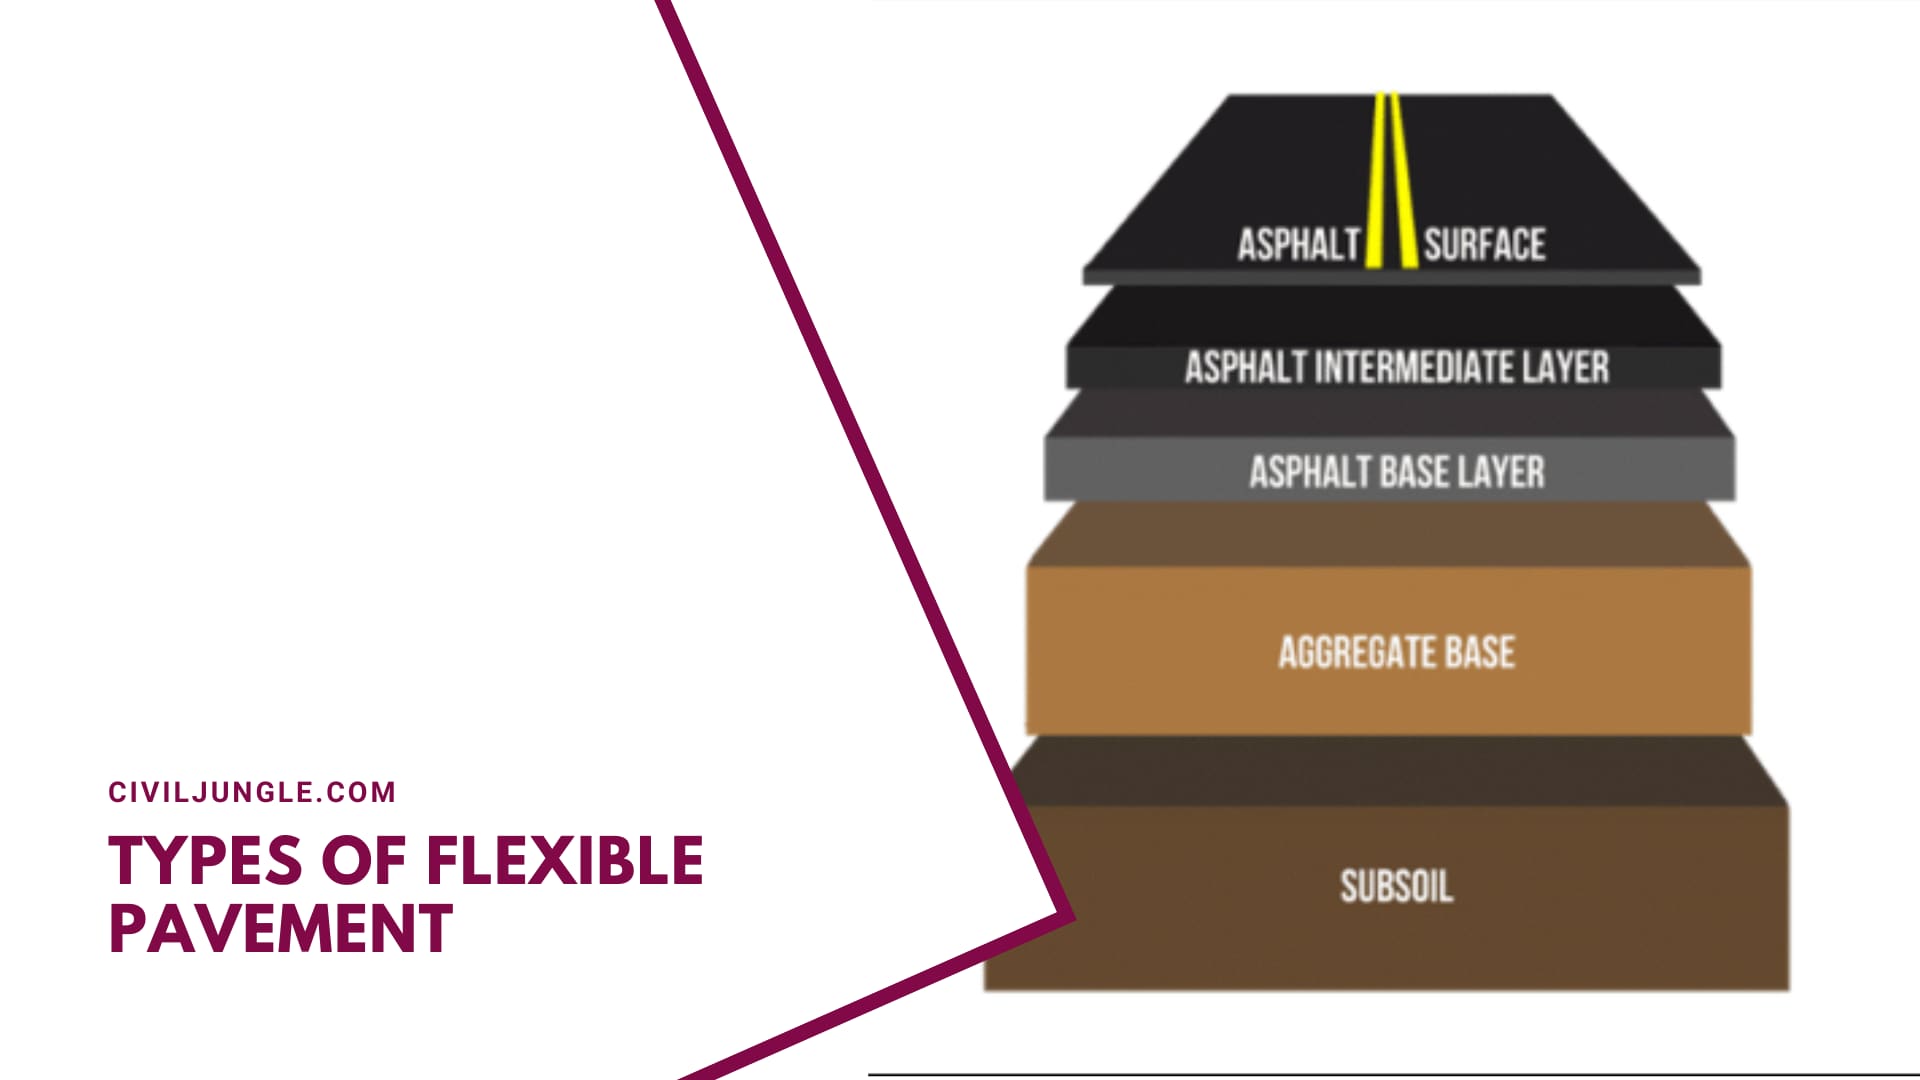 Types of Flexible Pavement